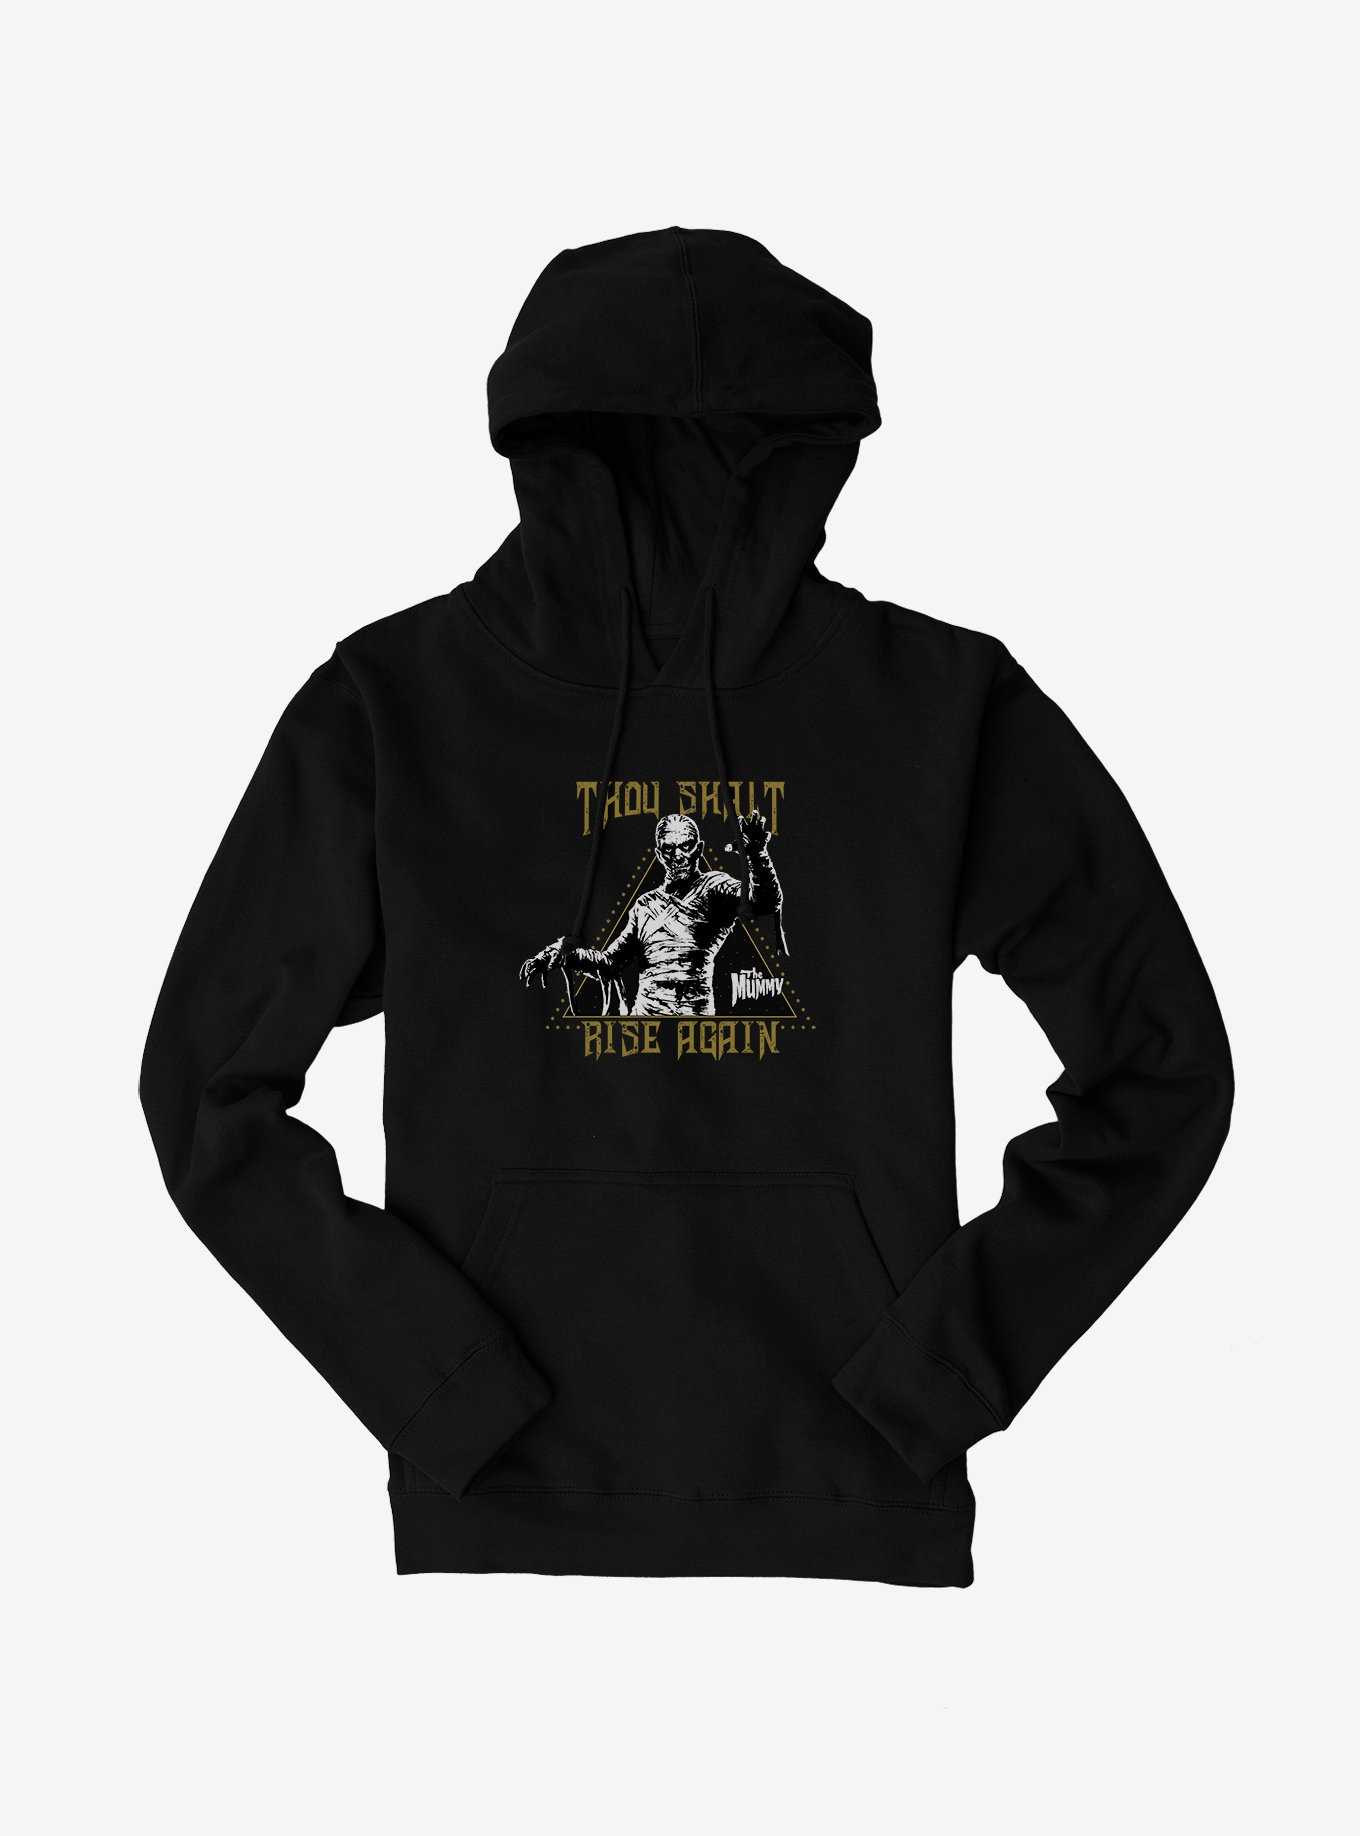 Universal Monsters The Mummy Thous Shalt Rise Again Hoodie, , hi-res